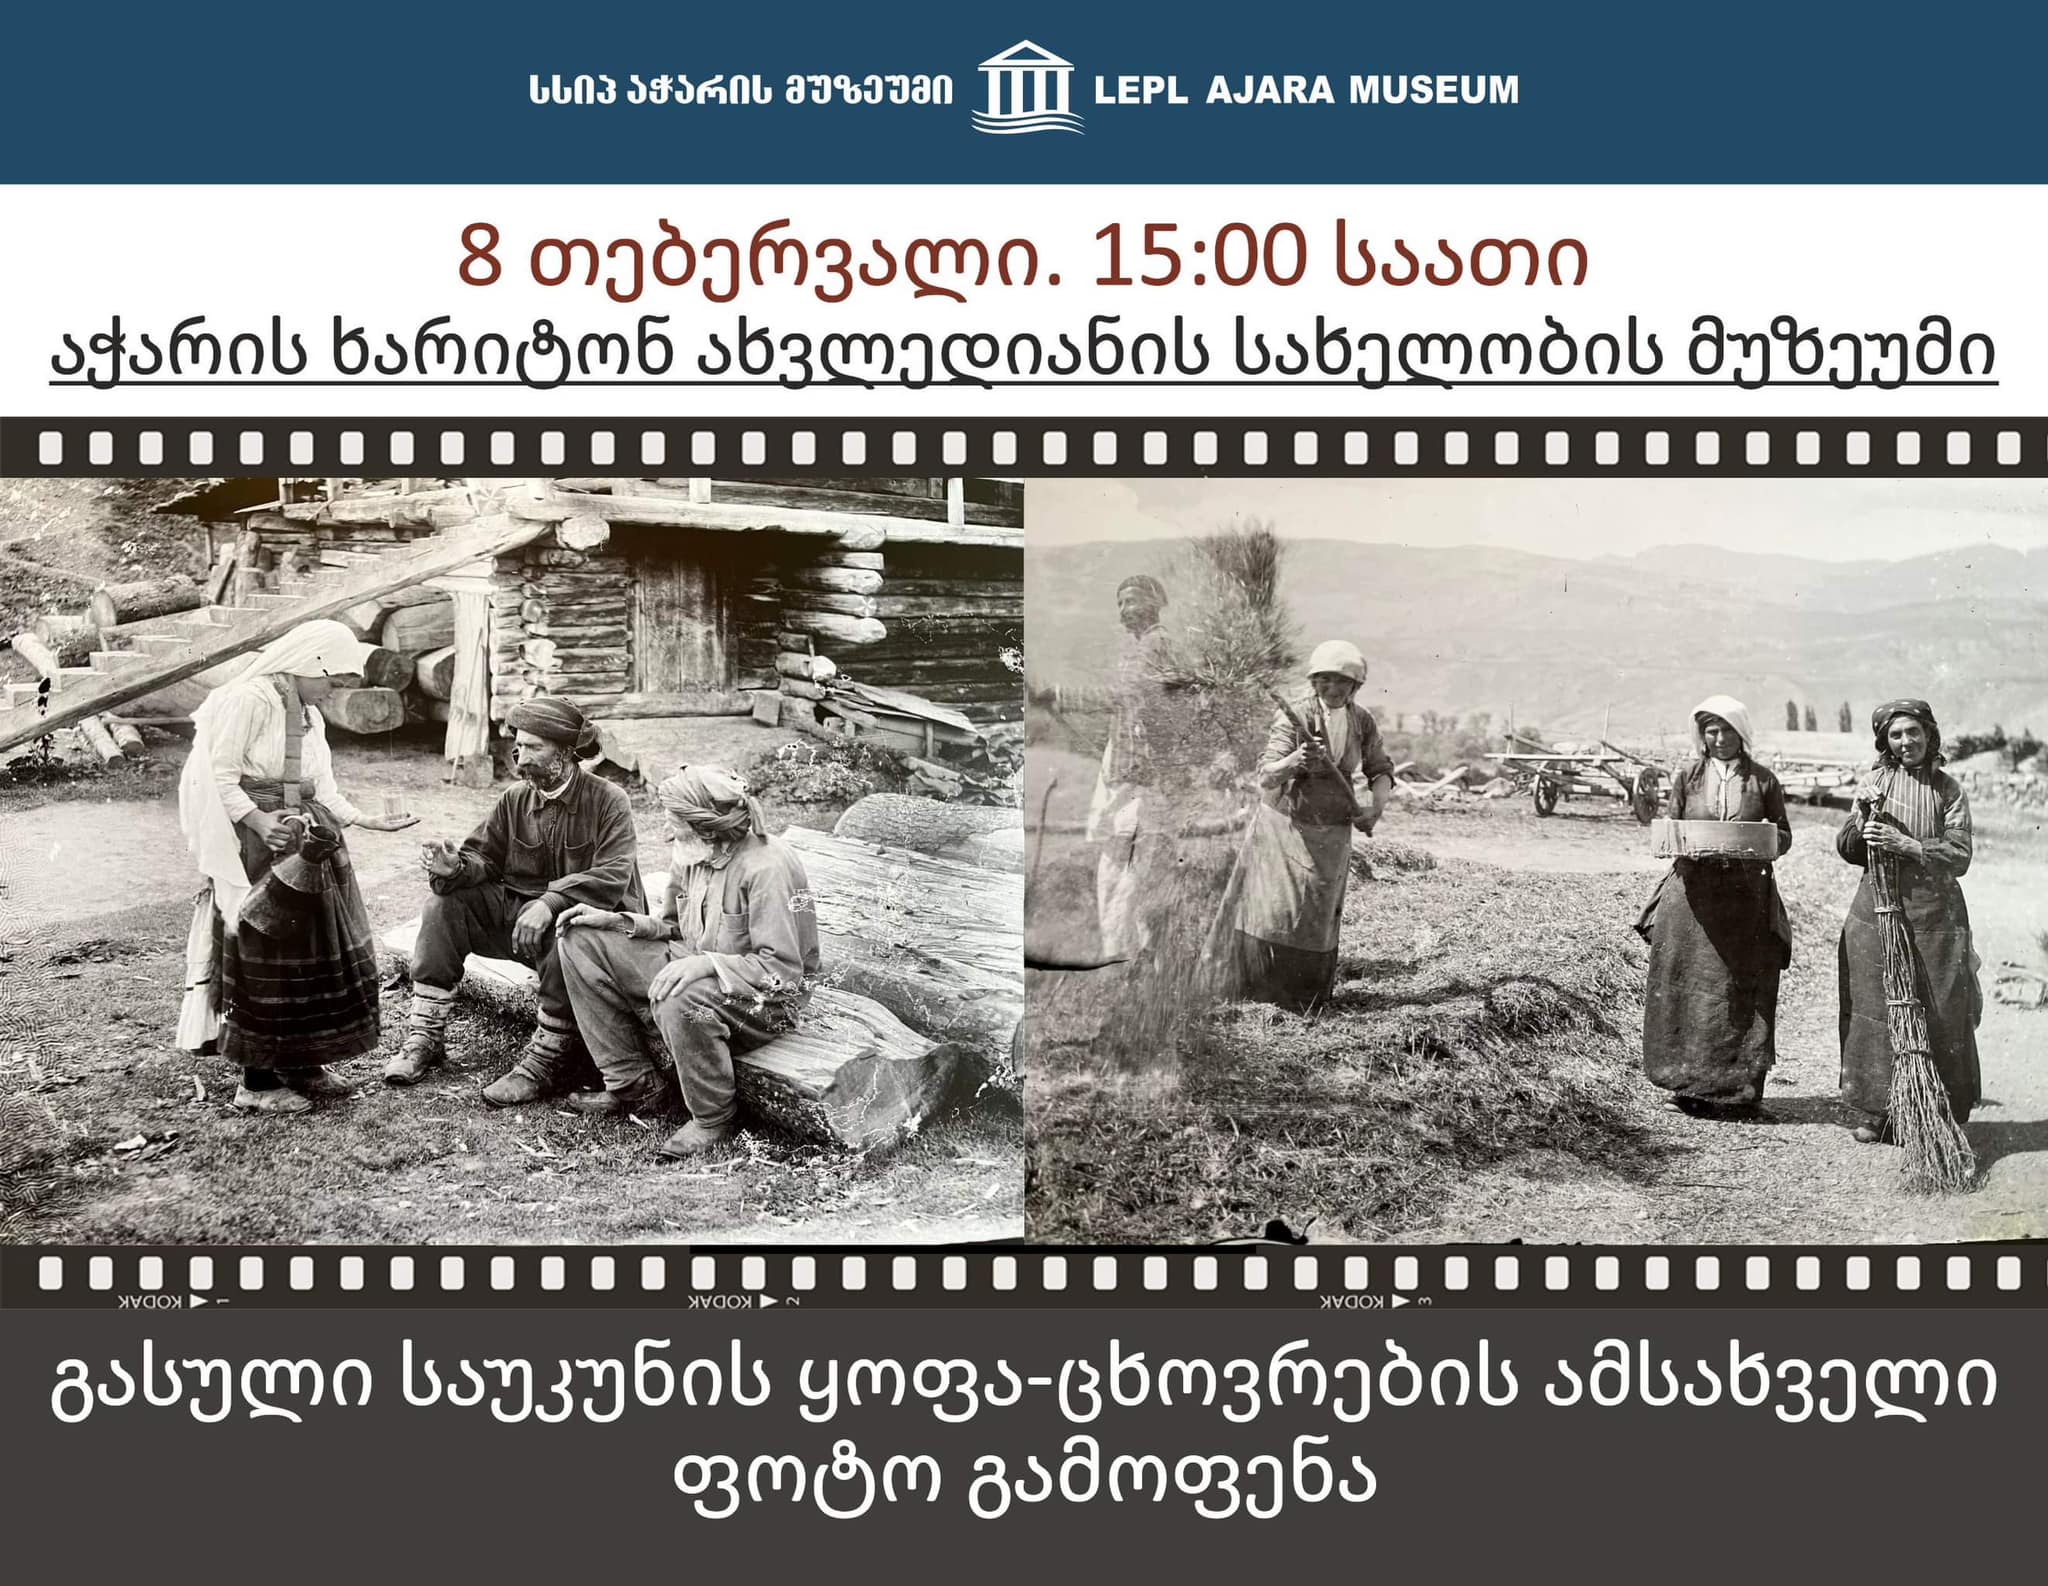 19th and 20th-century regional existence-life photo materials exhibition.